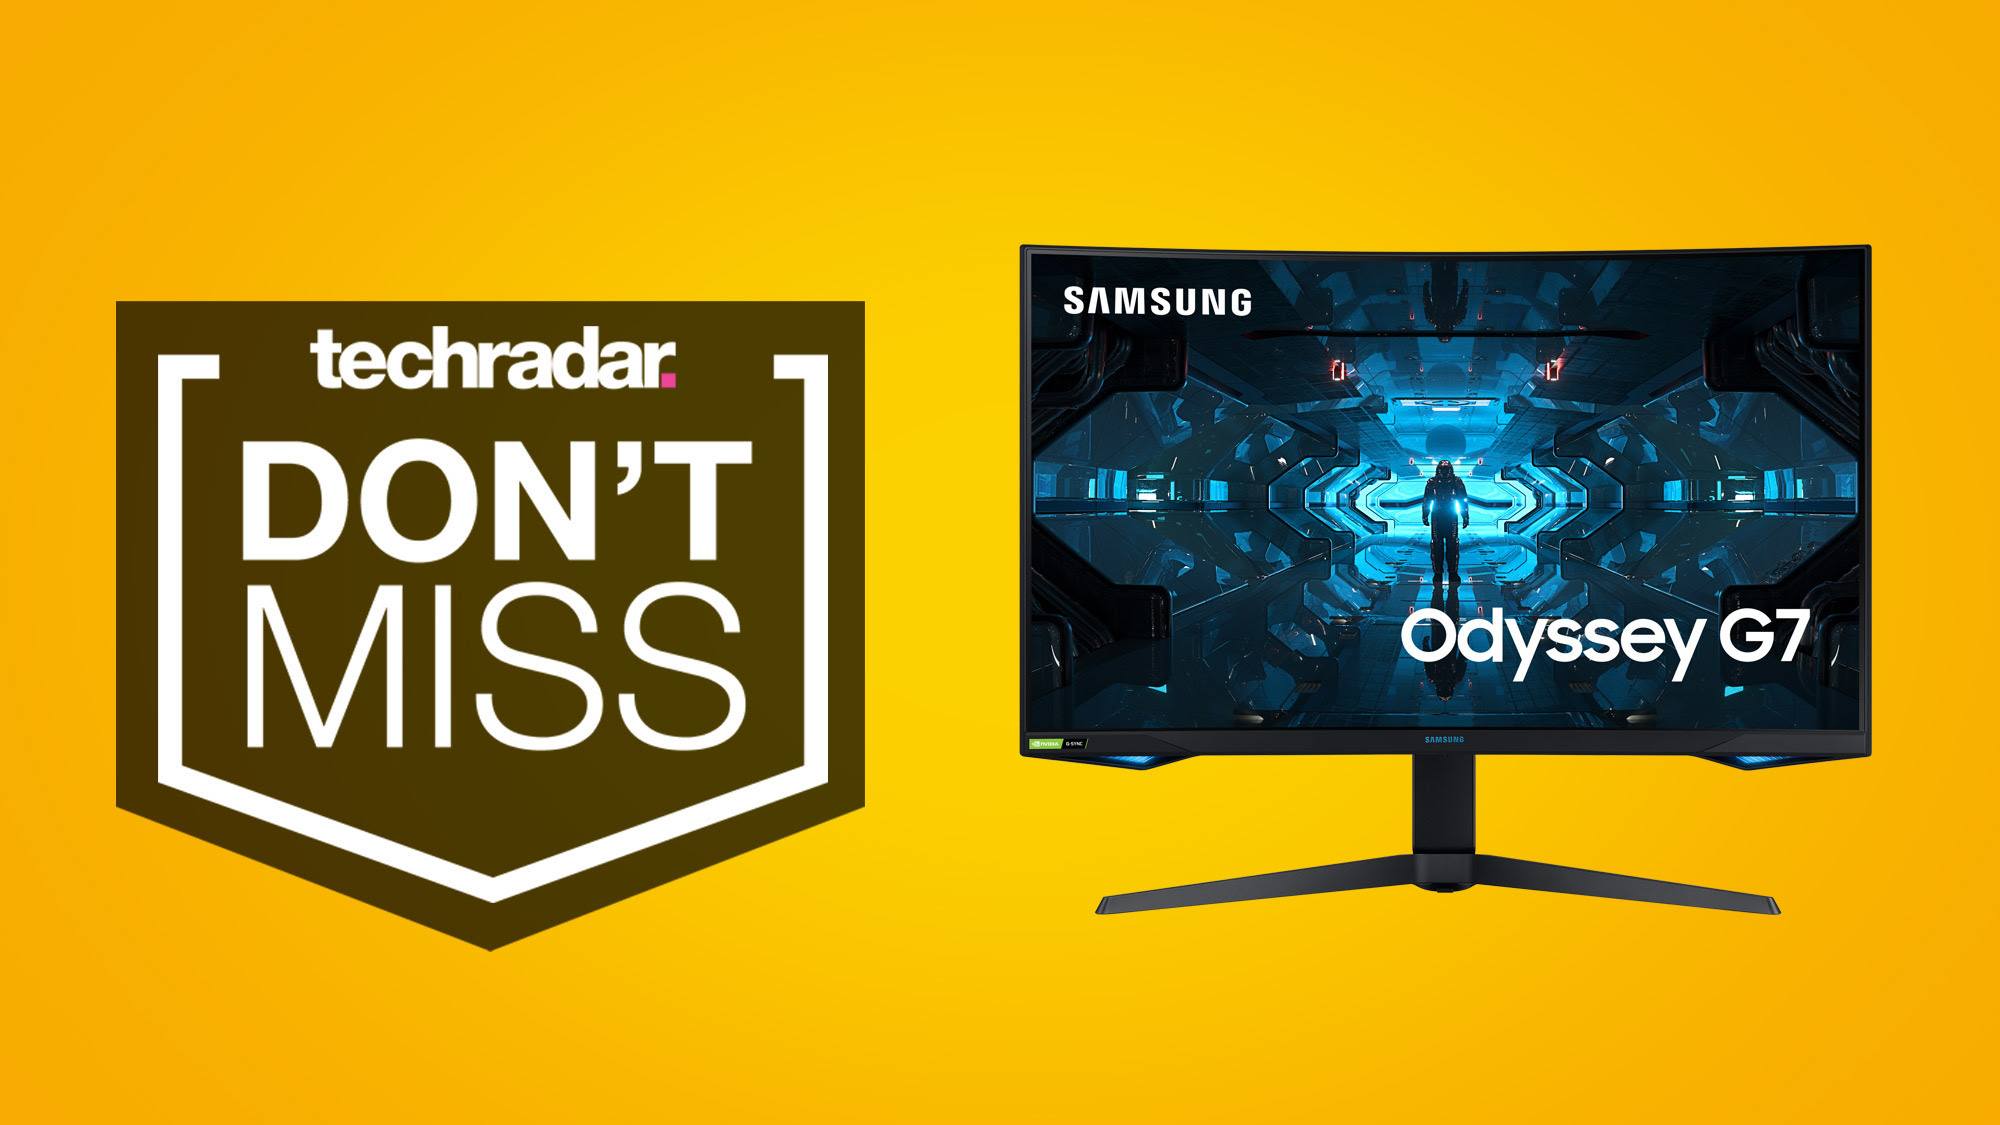 Our top-rated gaming monitor is reduced to its cheapest price in over a year